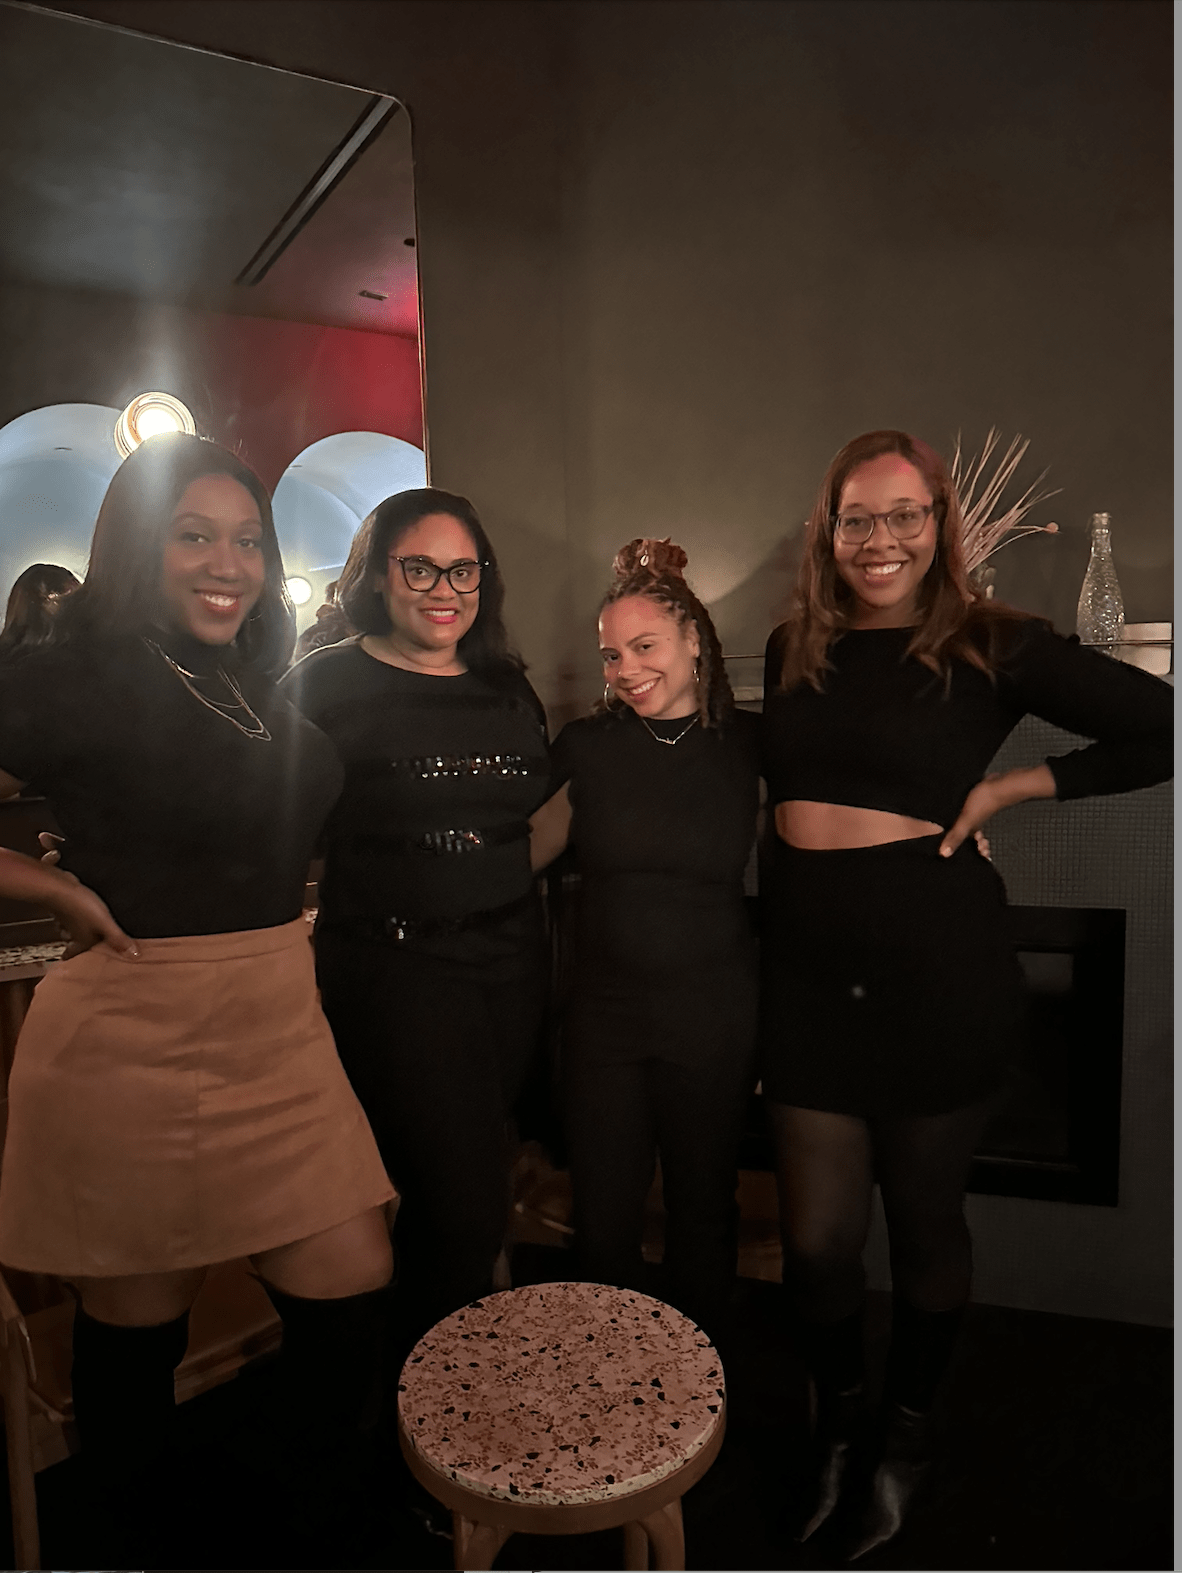 Four black women pose for a photo in a dimly lit restaurant